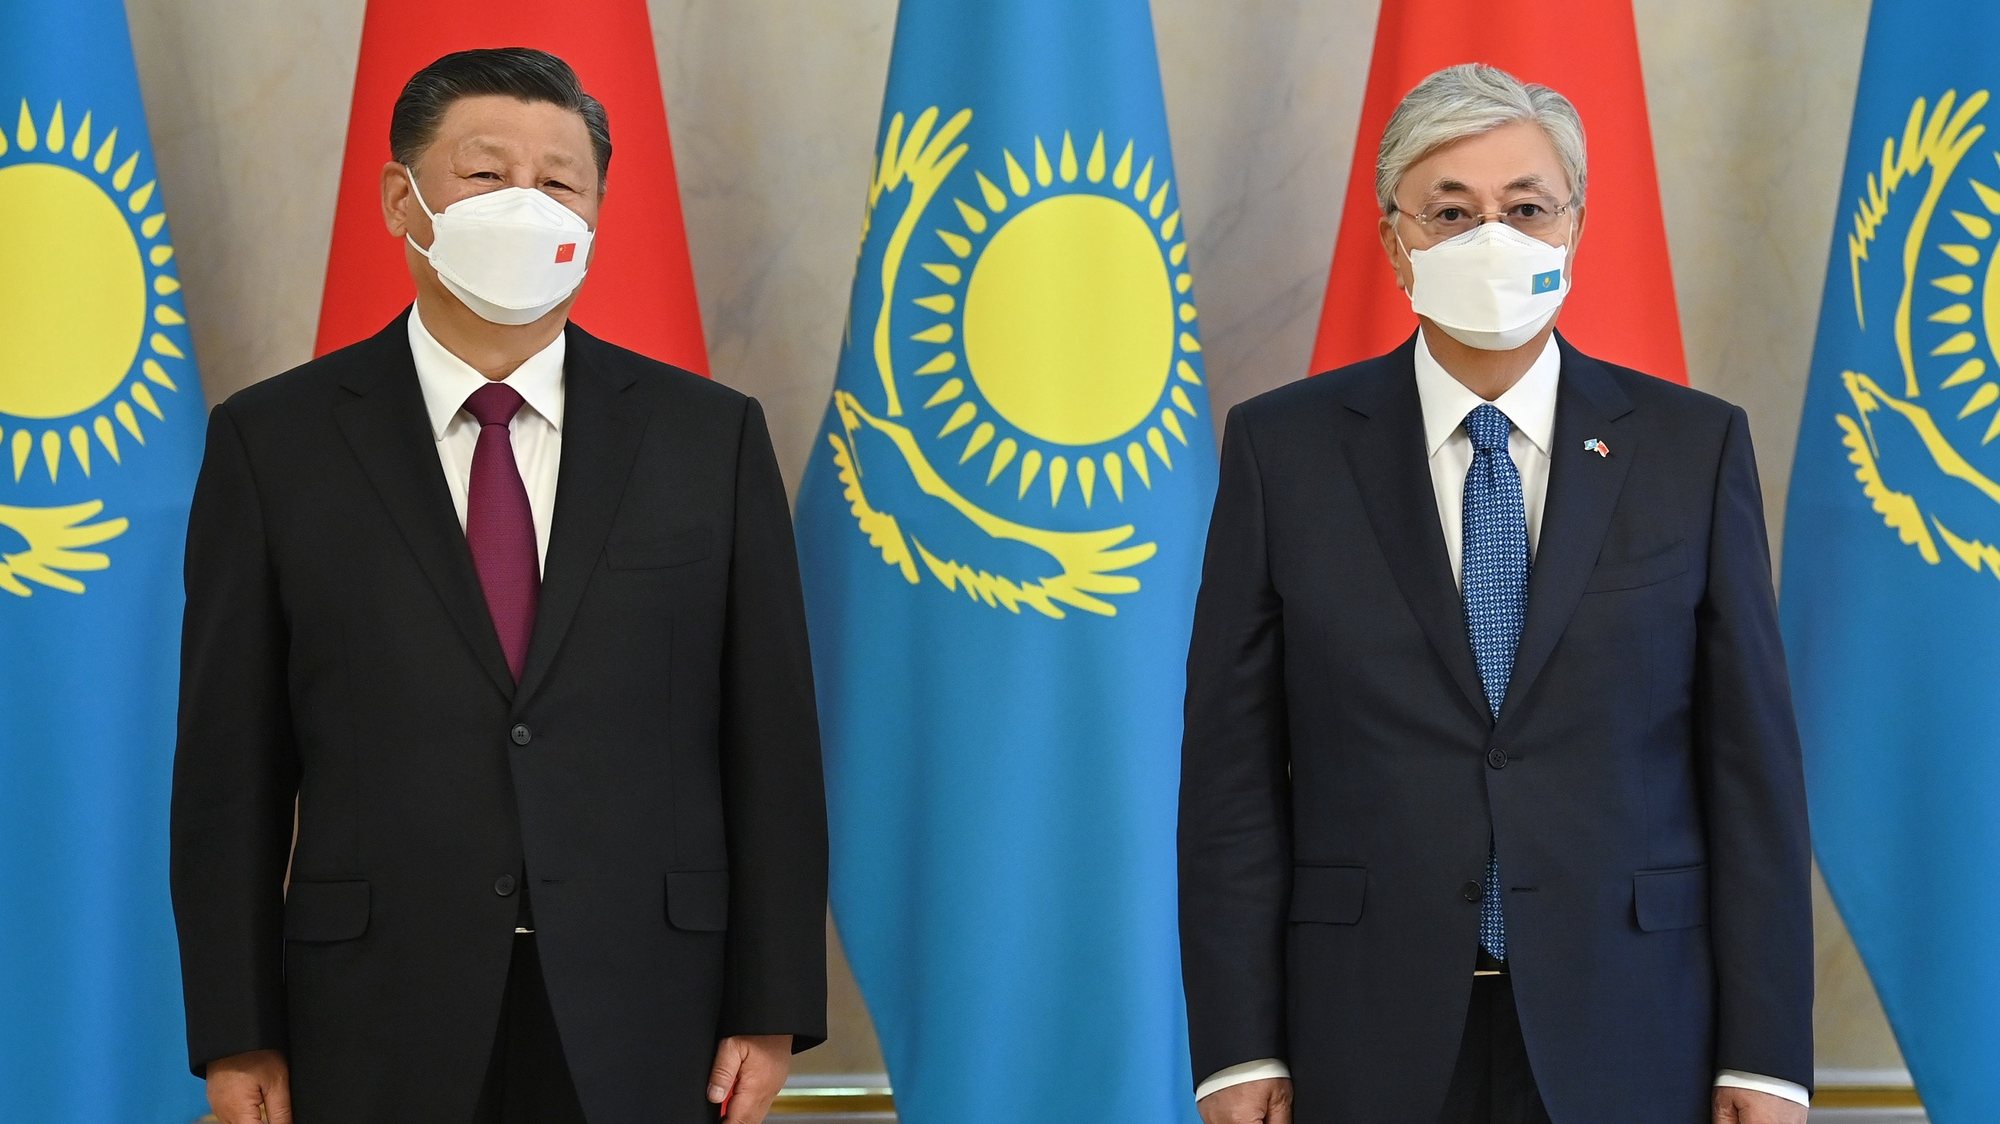 epa10183483 A handout photo made available by Kazakhstan President press-service shows Kazakh President Kassym-Jomart Tokayev (R) posing for pictures with the Chinese President Xi Jinping (L) during their meeting in Nur-Sultan, Kazakhstan, 14 September 2022. Xi Jinping is on a one day working visit to Kazakhstan.  EPA/KAZAKHSTAN PRESIDENT PRESS SERVICE / HANDOUT  HANDOUT EDITORIAL USE ONLY/NO SALES